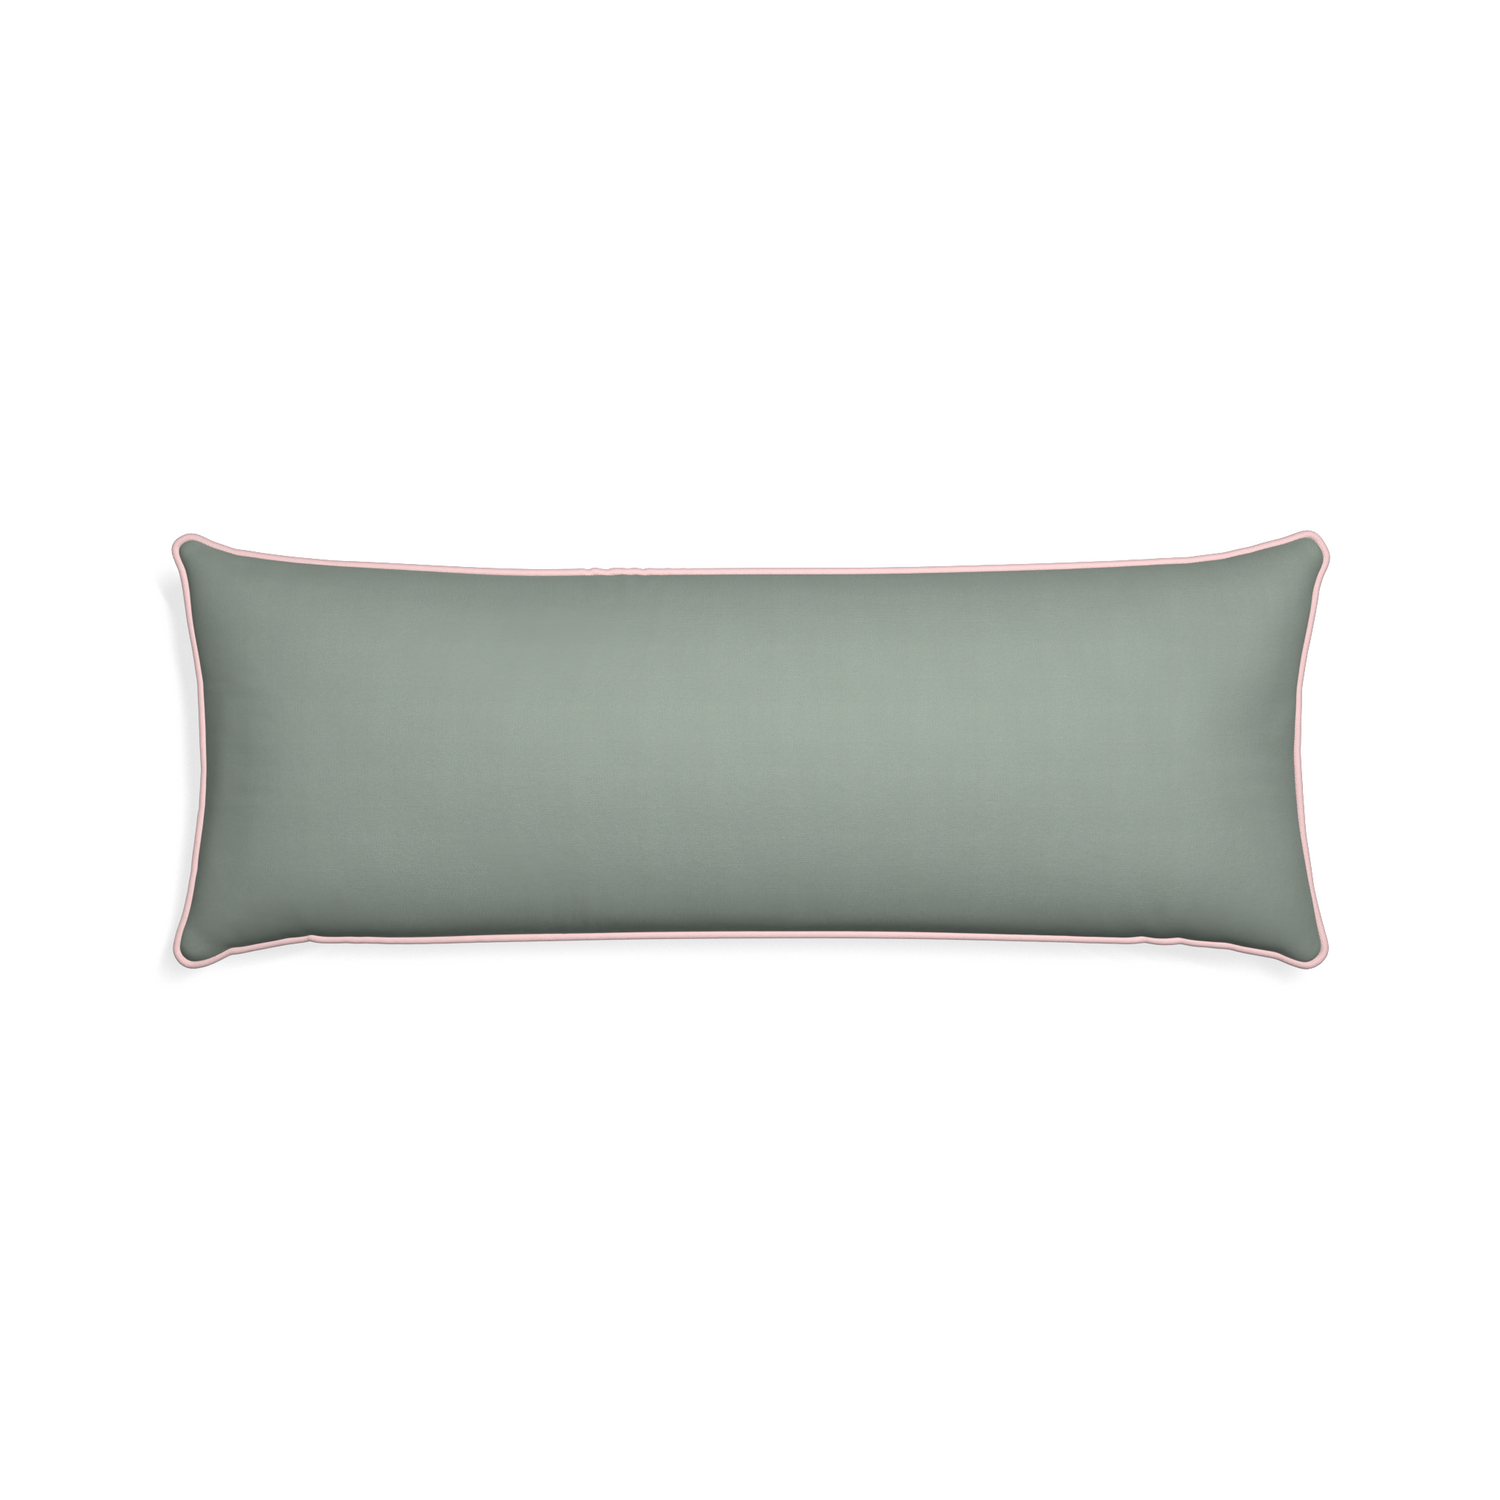 Xl-lumbar sage custom sage green cottonpillow with petal piping on white background